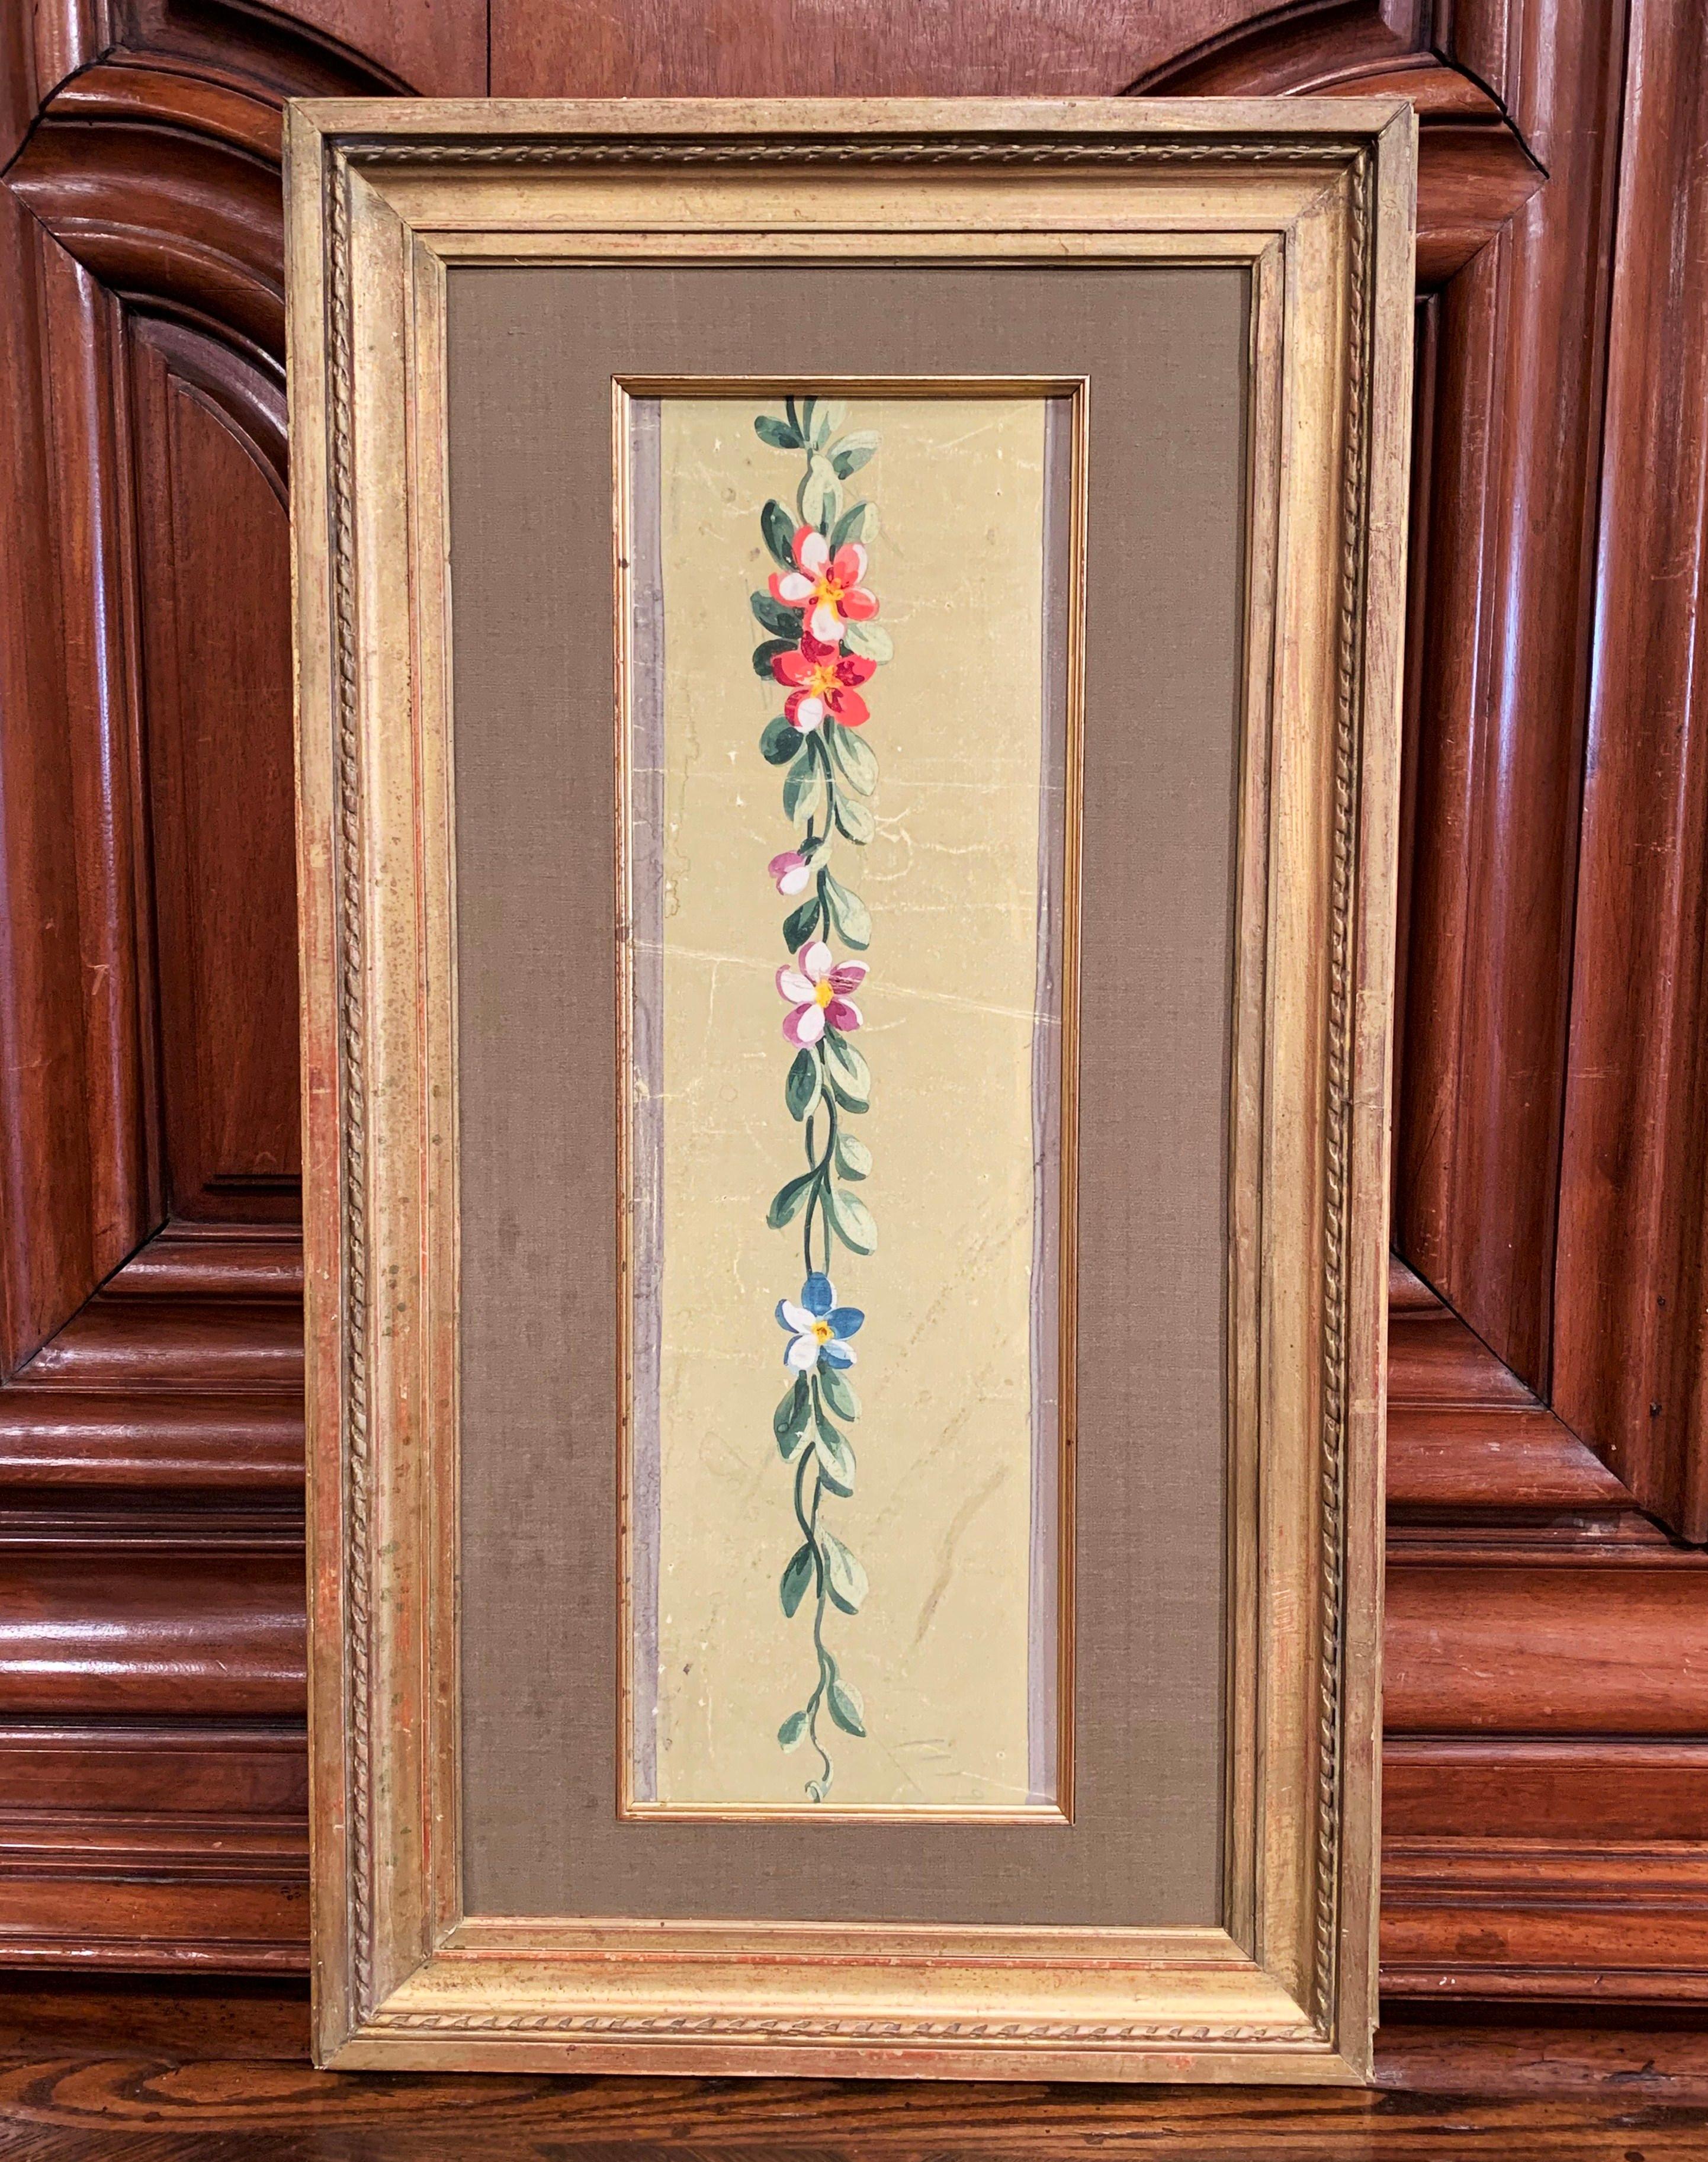 19th Century French Aubusson Floral Tapestry Gouache on Paper in Gilt Frame In Excellent Condition For Sale In Dallas, TX